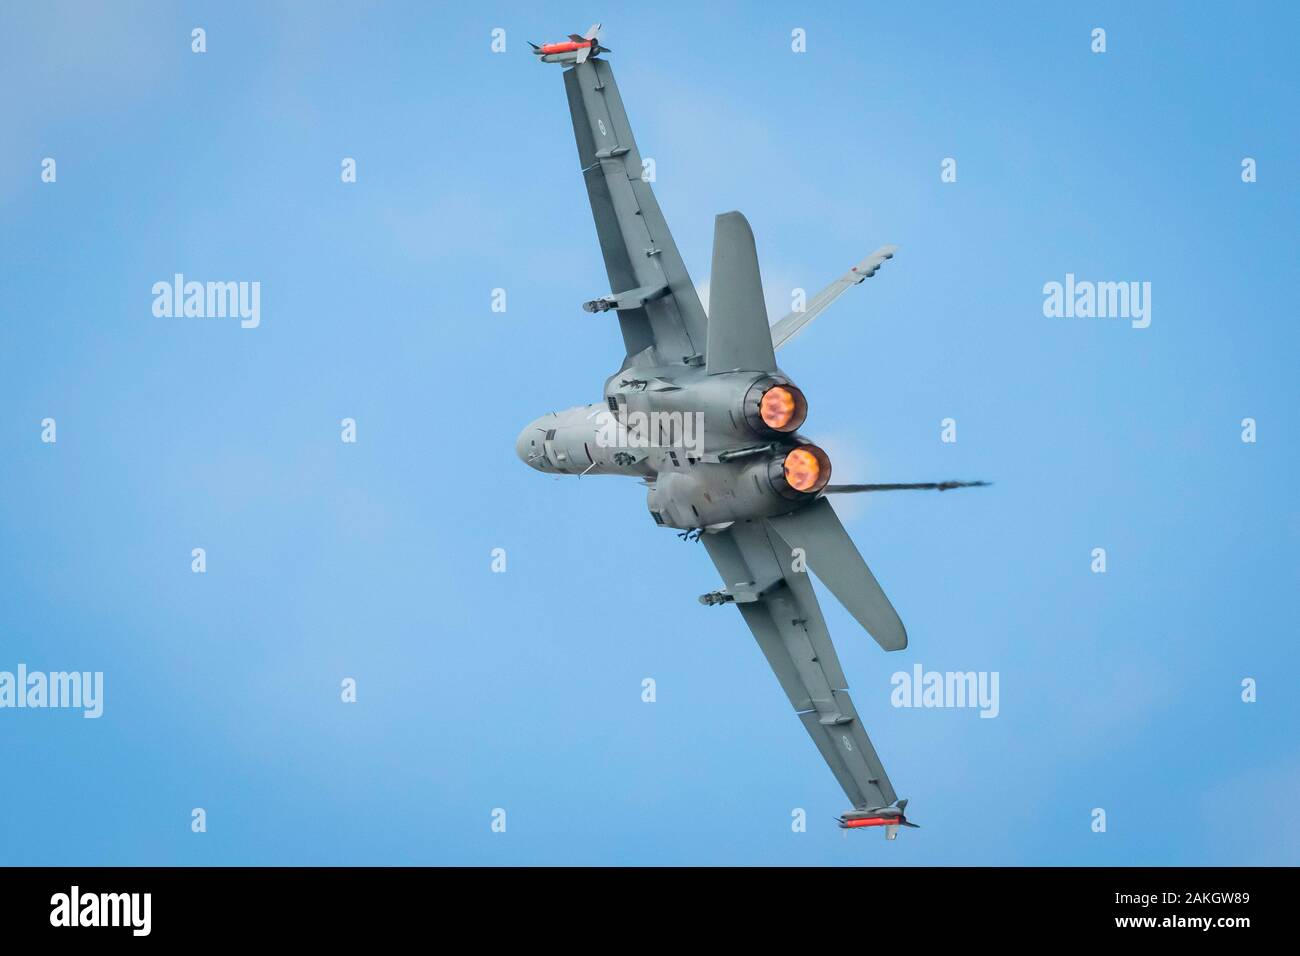 Fairford, Gloucestershire, UK - July 20th, 2019:Finish Air Force Mcdonnell Douglas F/A-18 Hornet performing its Aerobatic Display at Fairford Internat Stock Photo